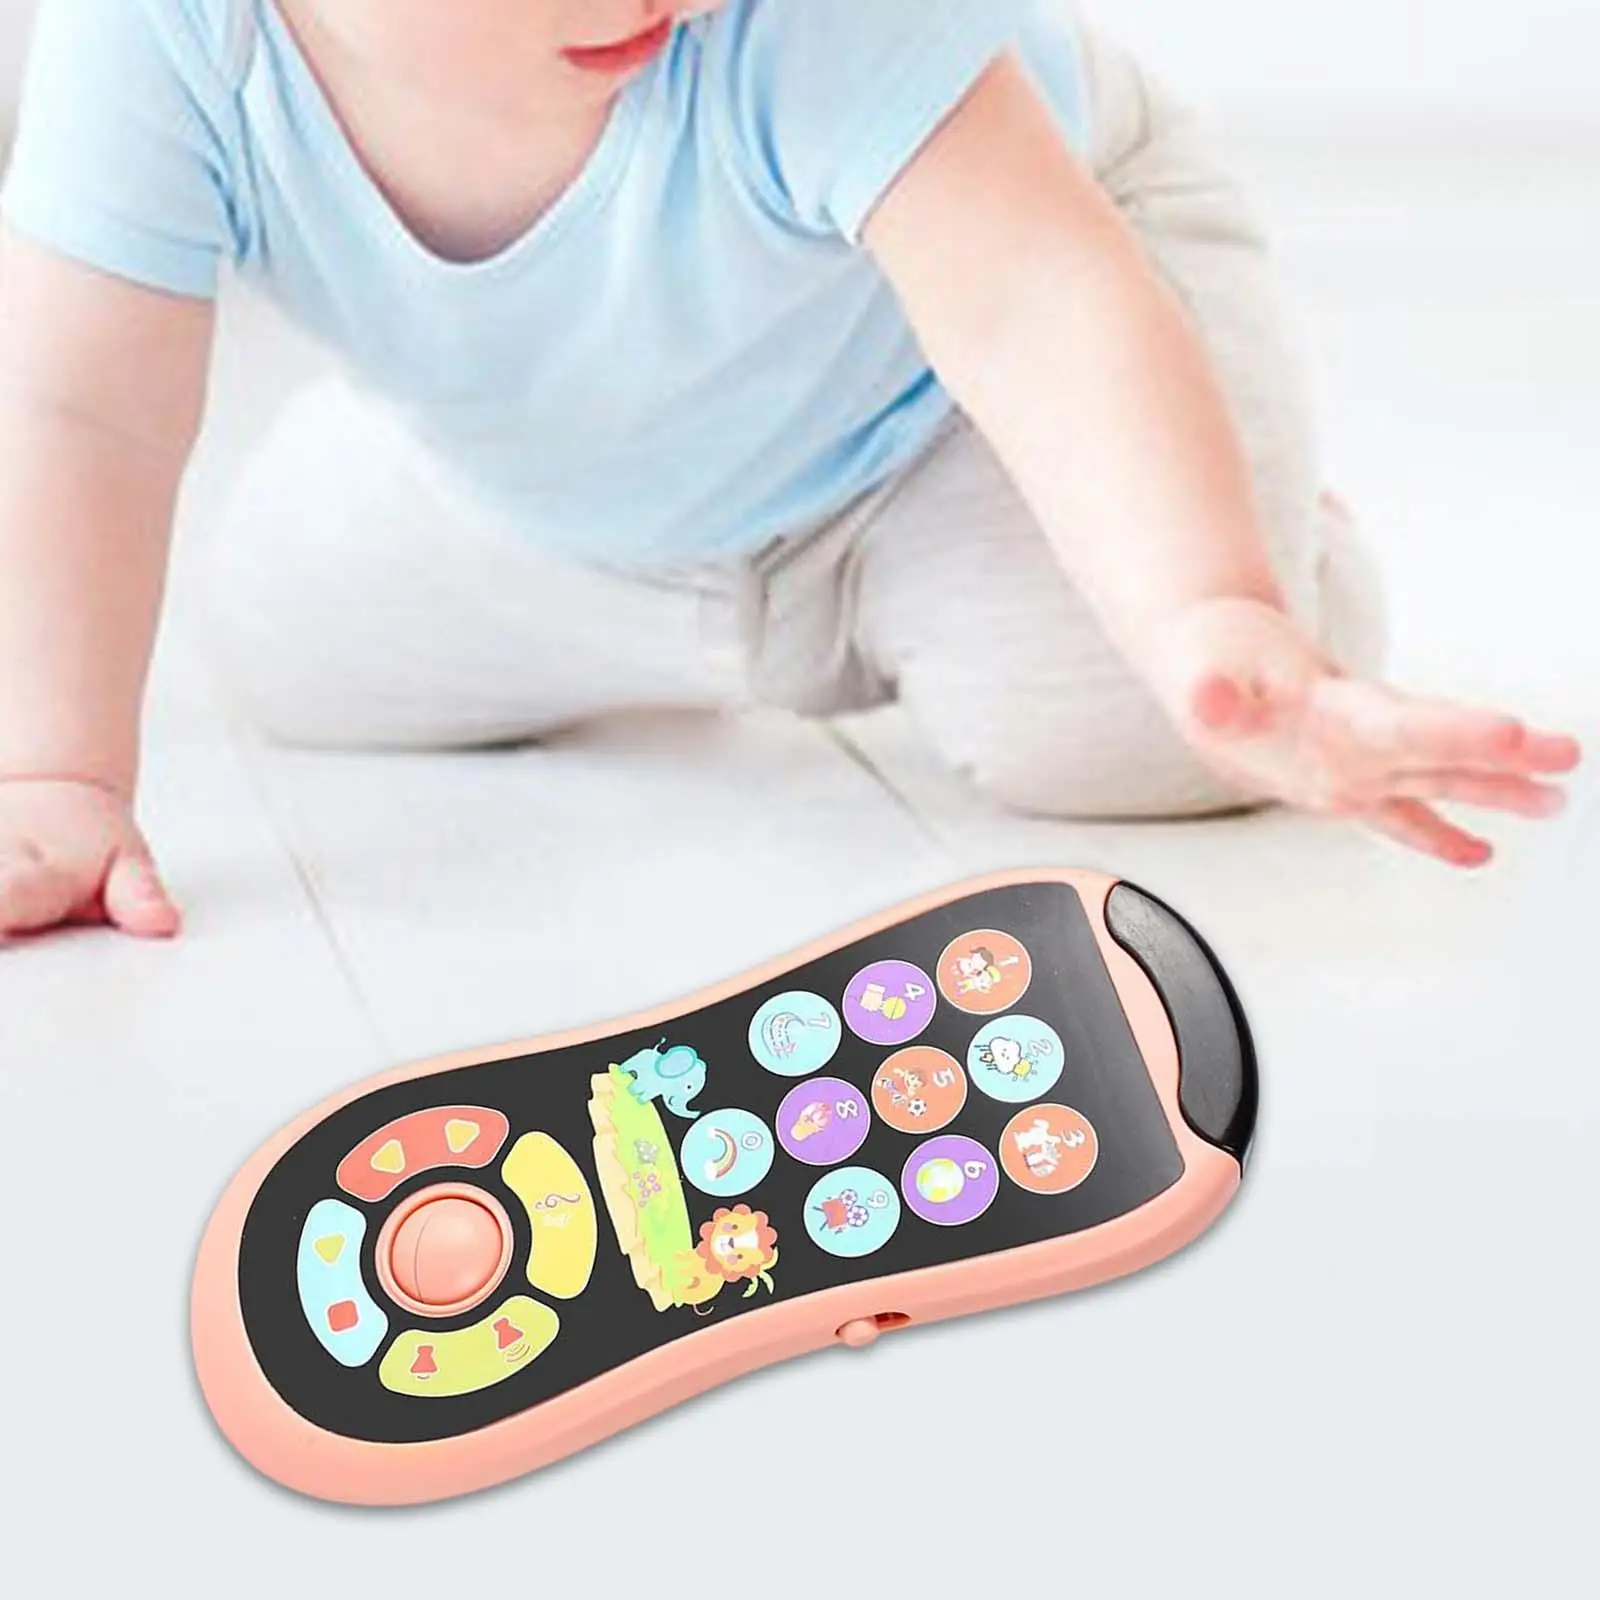 Mini Phone Toys Learning Musical Toys with Lights and Music Telephone Toy for Girls Boy Children Gift